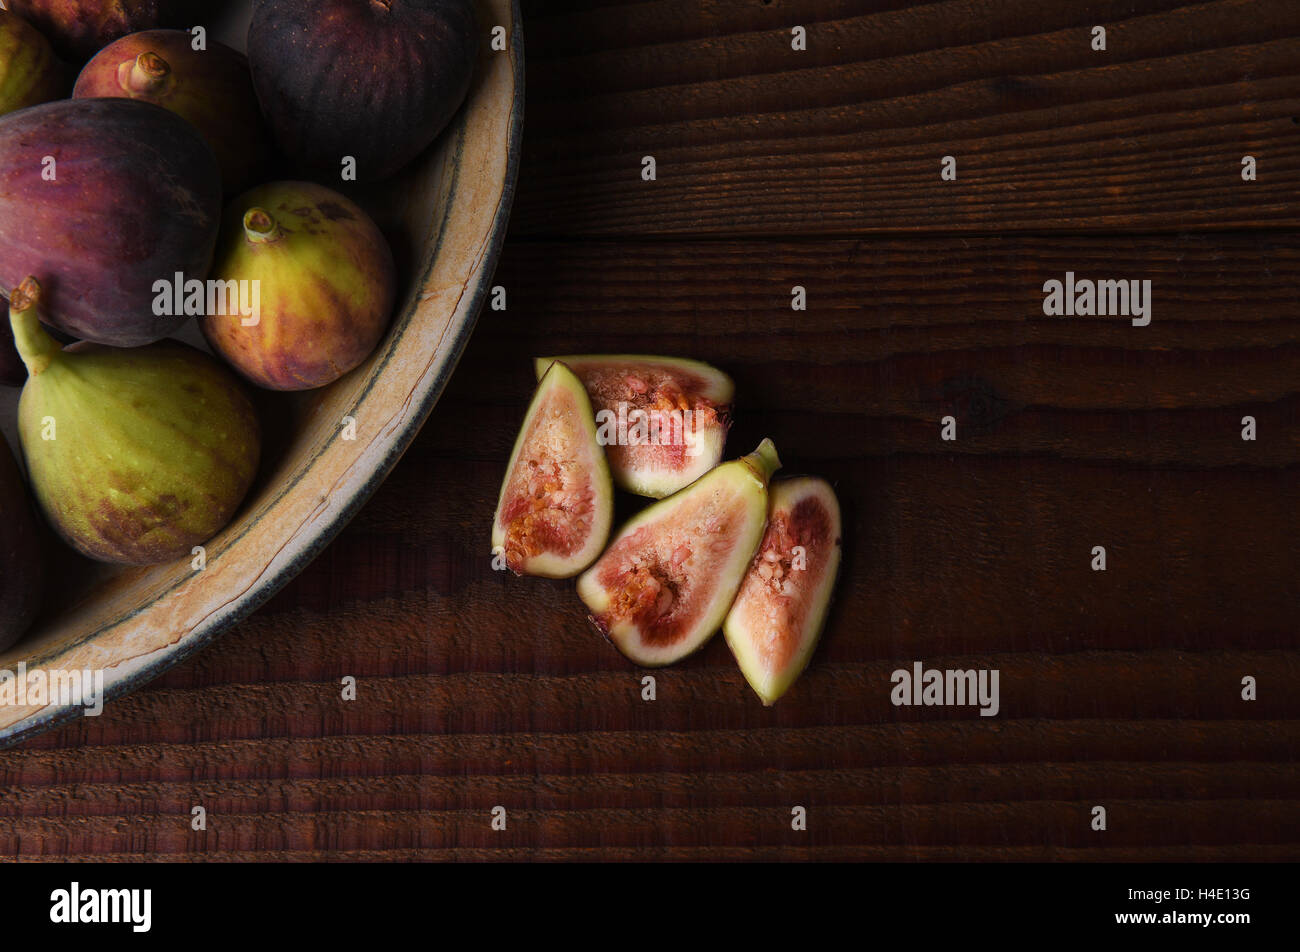 A plate full of fresh figs with one cut up on a dark wood table. Stock Photo